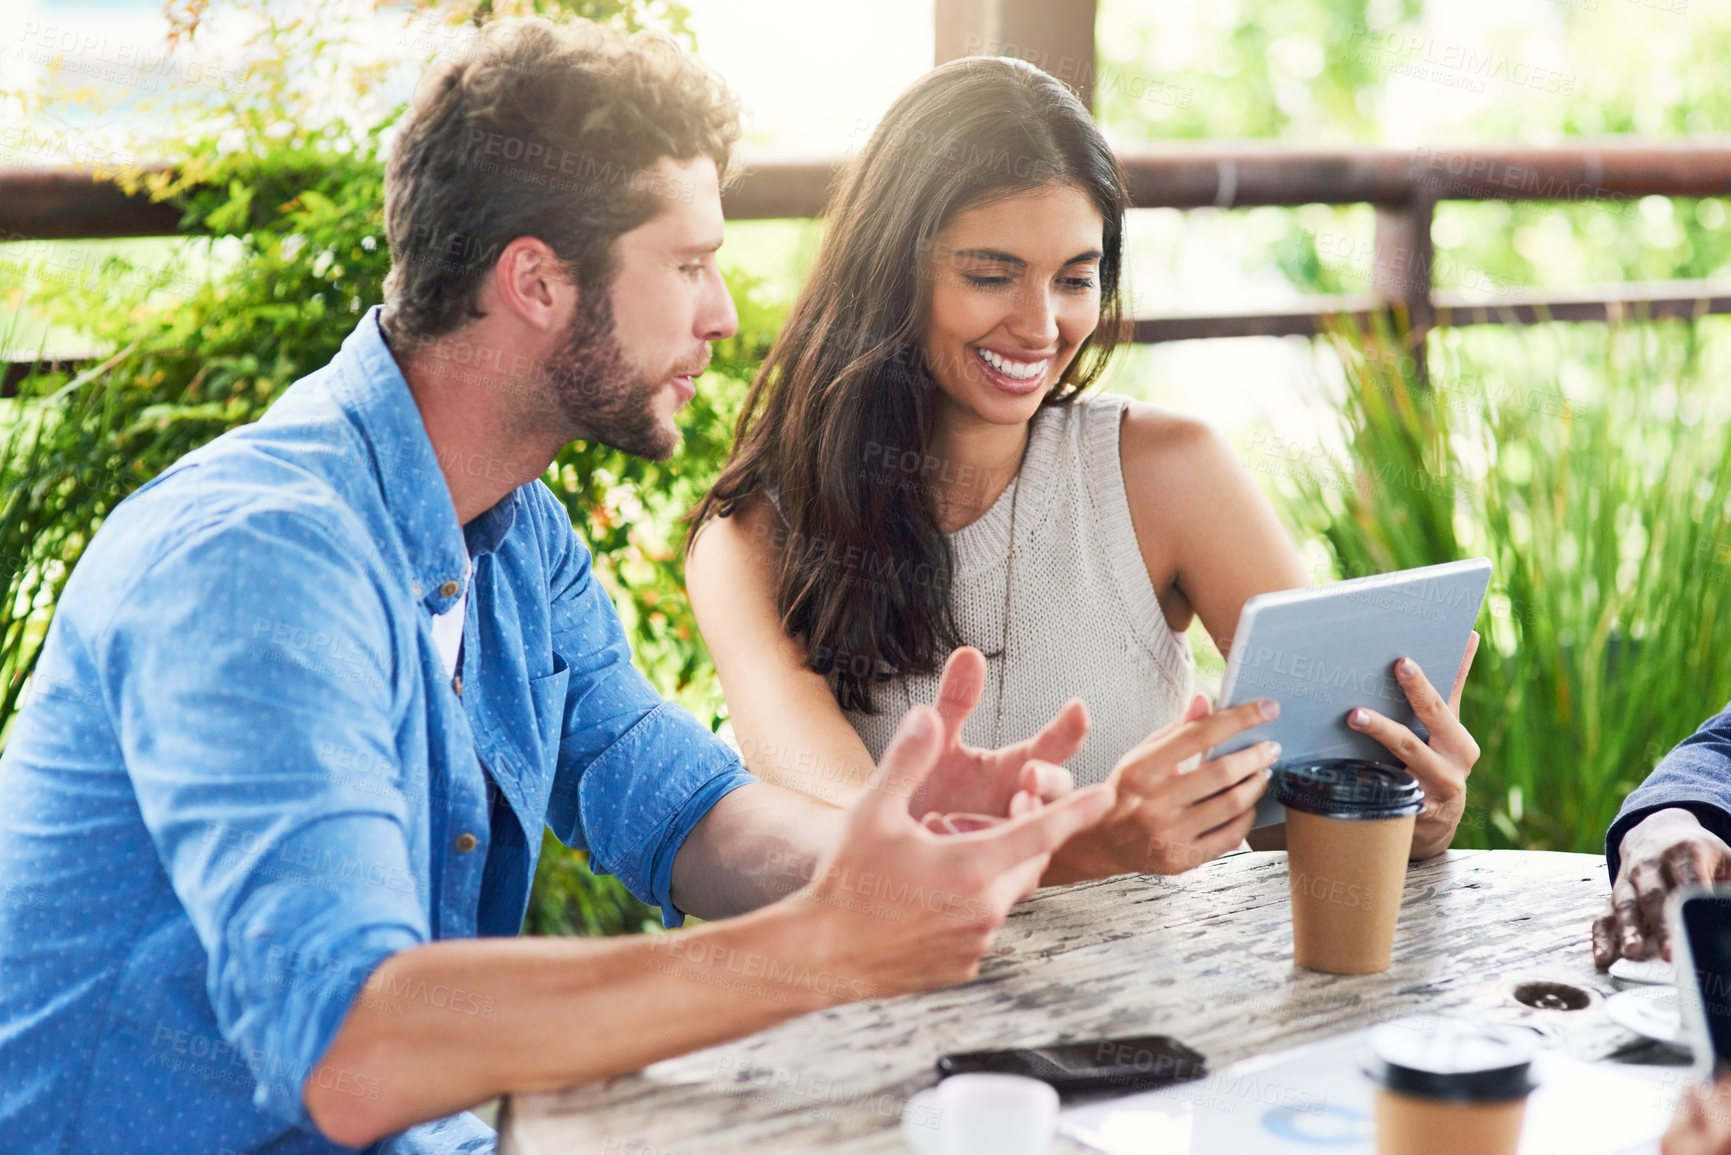 Buy stock photo Shot of two businesspeople using a digital tablet together outdoors